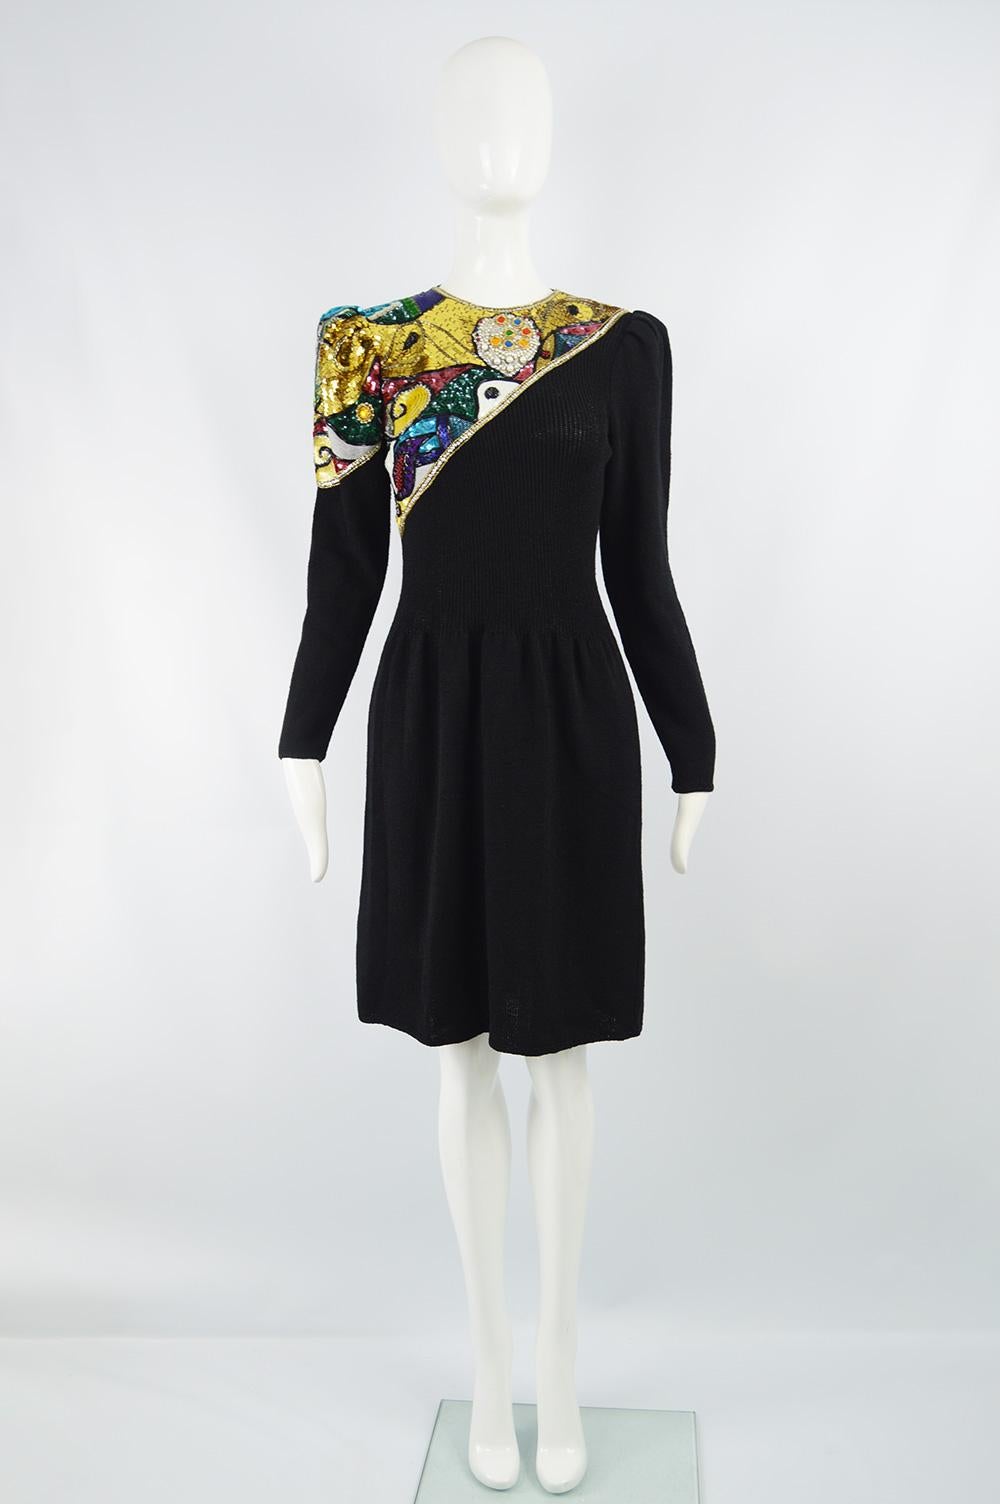 A fabulous vintage evening dress from the 80s by luxury American fashion designer, Pat Sandler. In a black knit fabric with gold & multicolored beading and sequins. Perfect for a cocktail or holiday party. 

Size: Marked US 6 which is roughly a UK